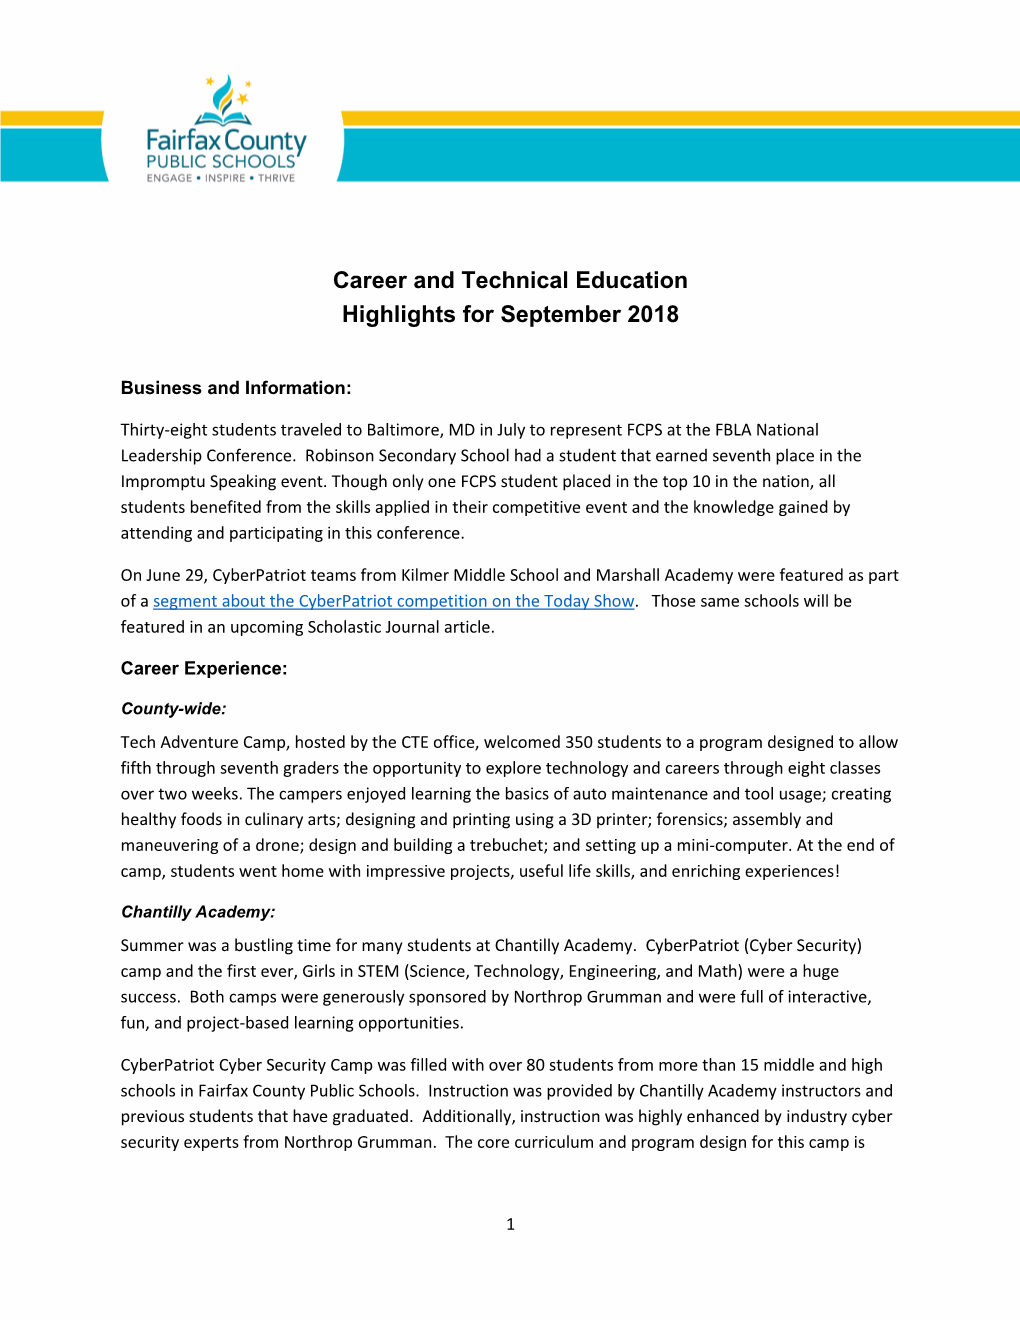 Career and Technical Education Highlights for September 2018